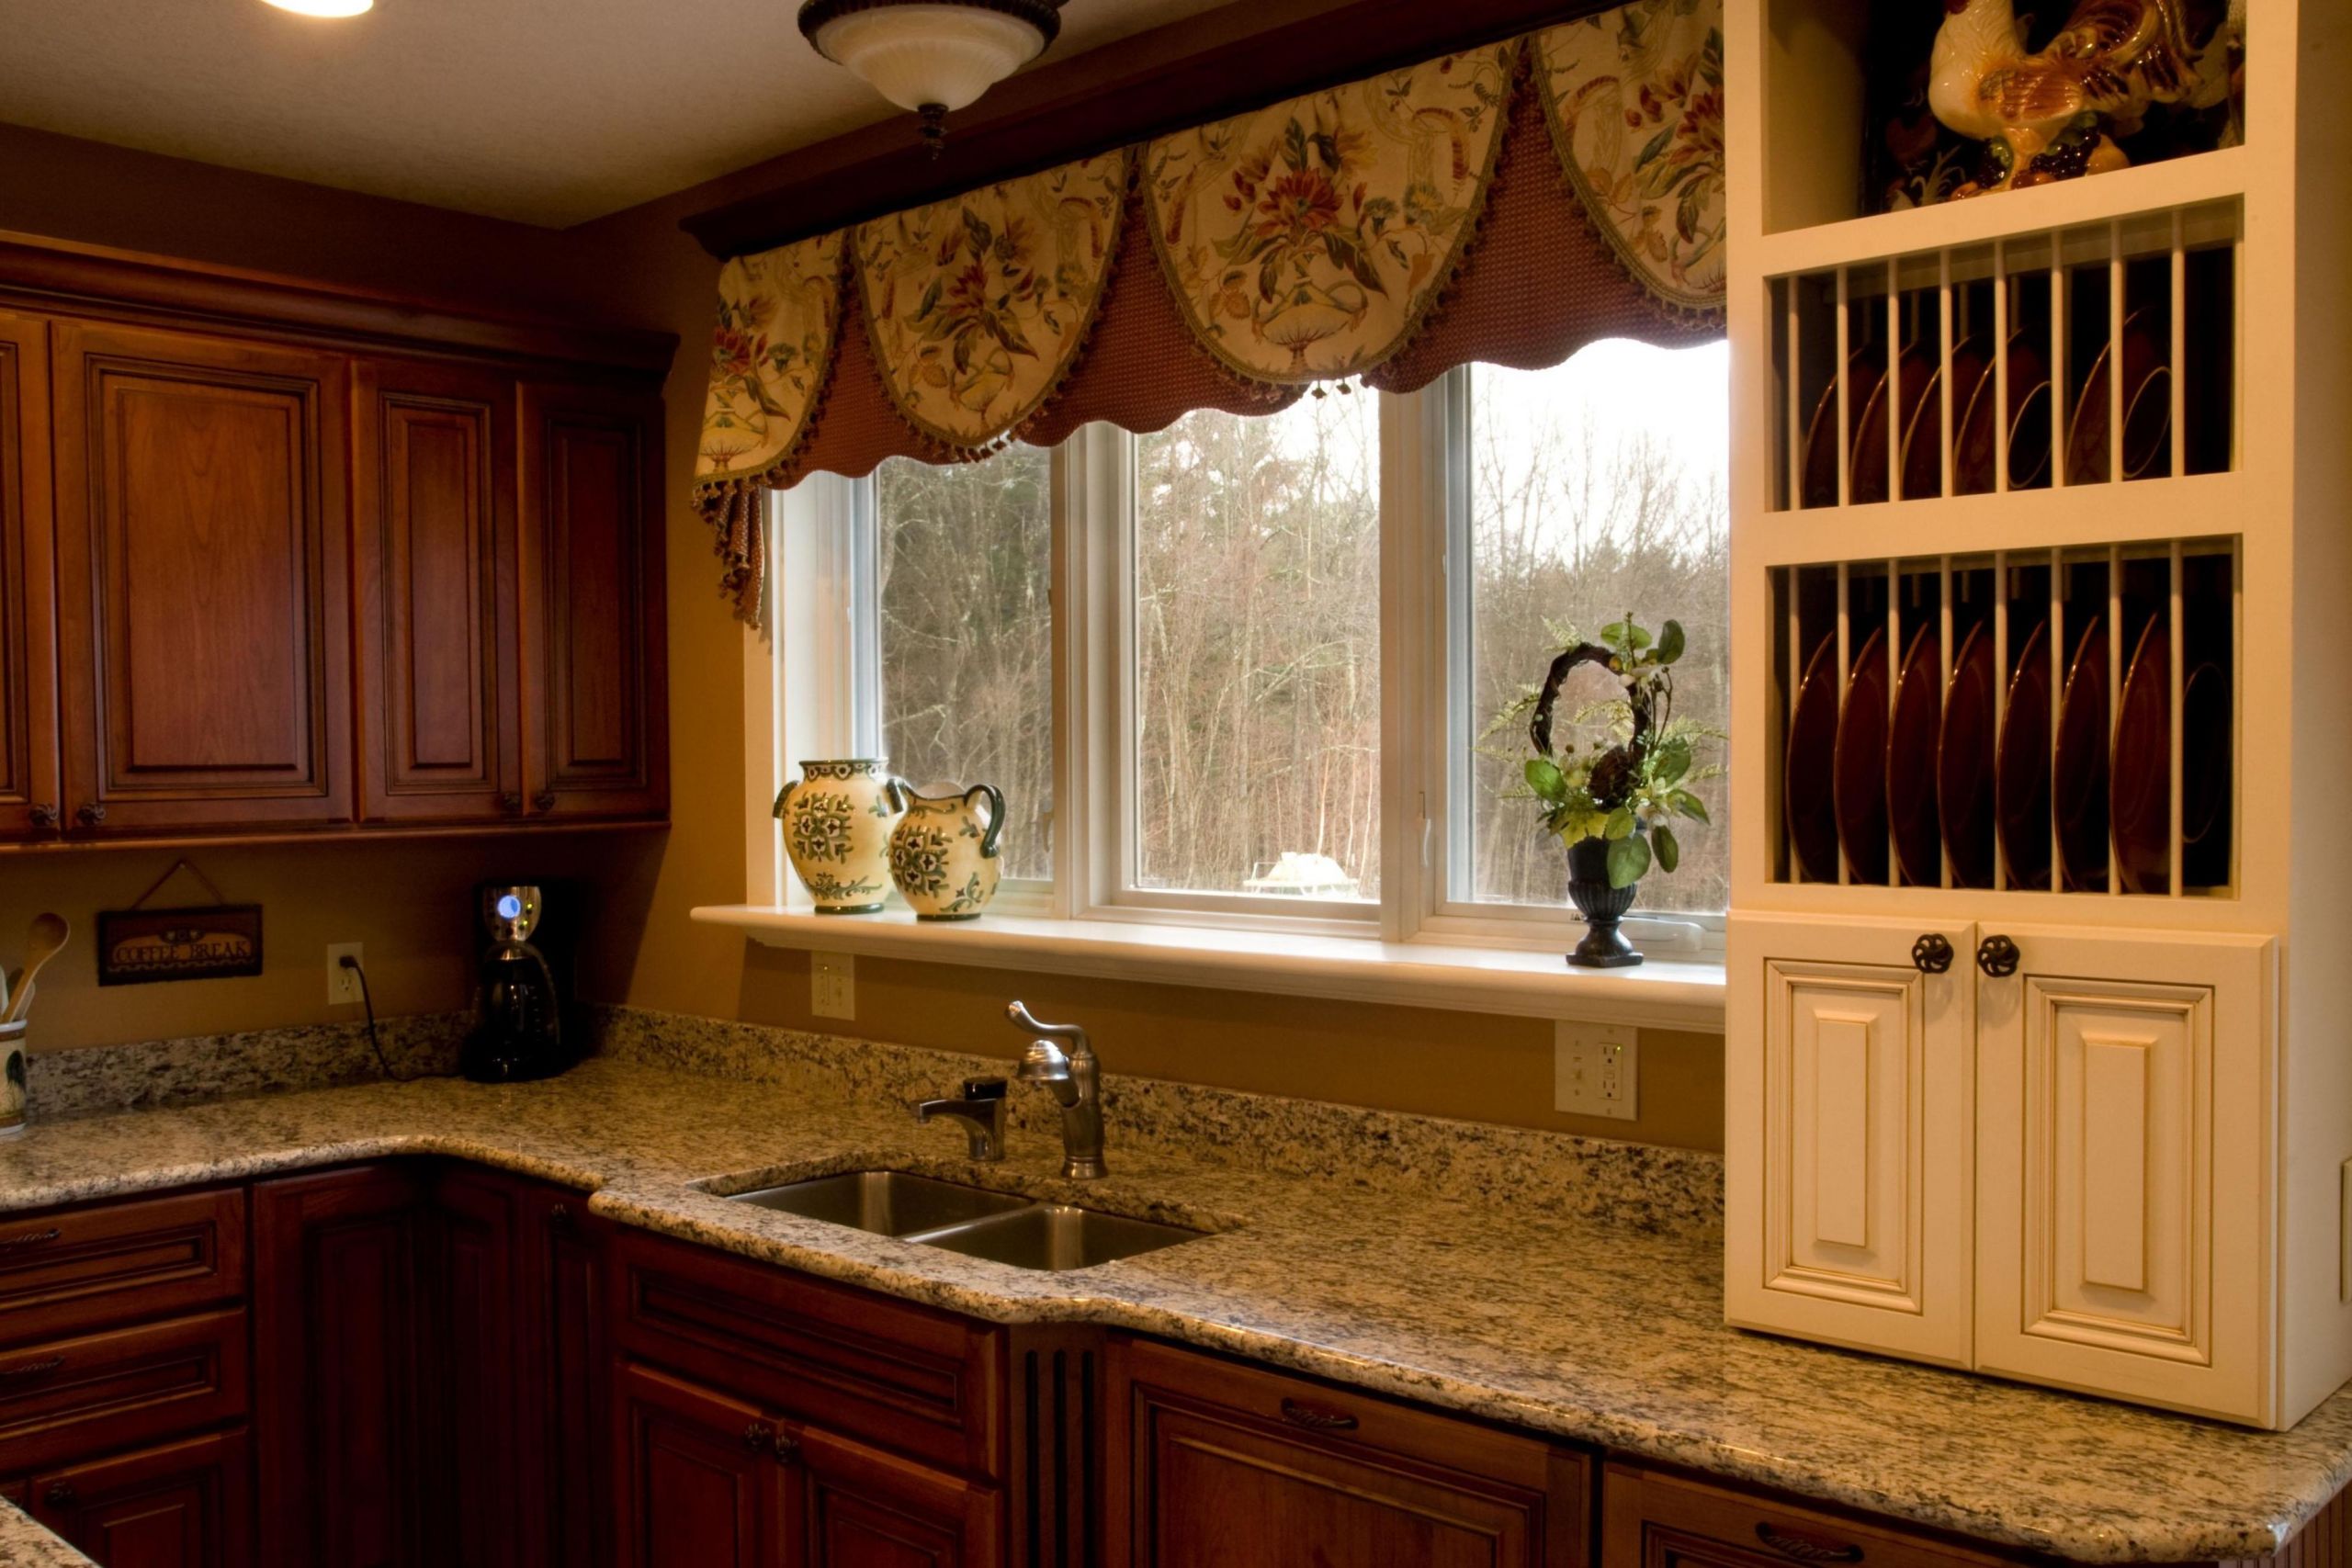 Kitchen Curtains Images
 Window Treatments For Kitchen Ideas